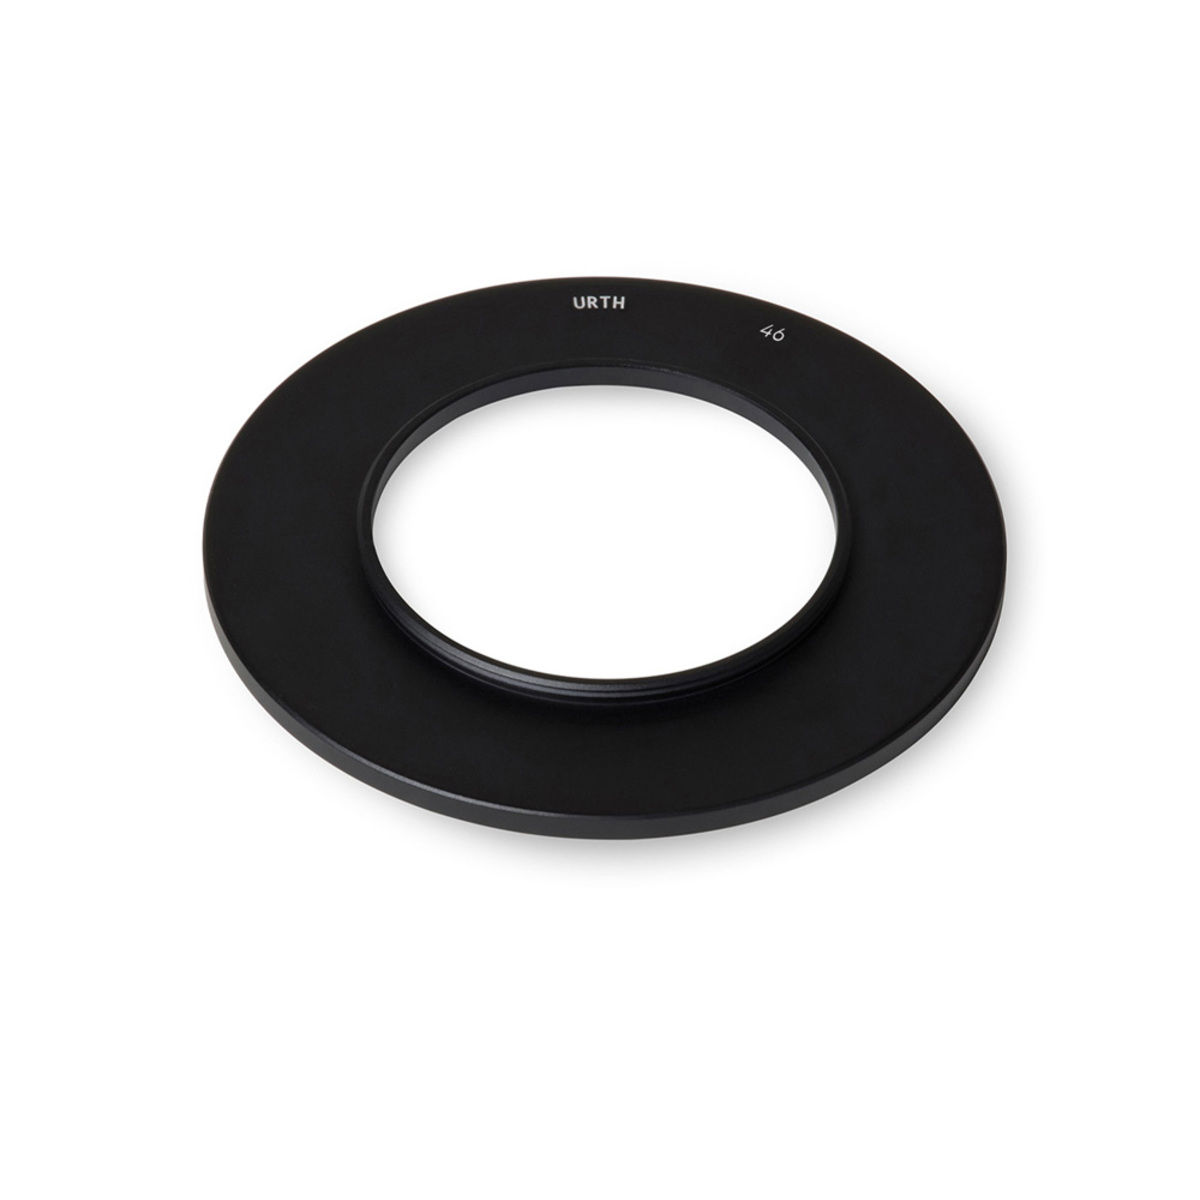 Urth 86-46mm Adapter Ring for 100mm Square Filter Holder